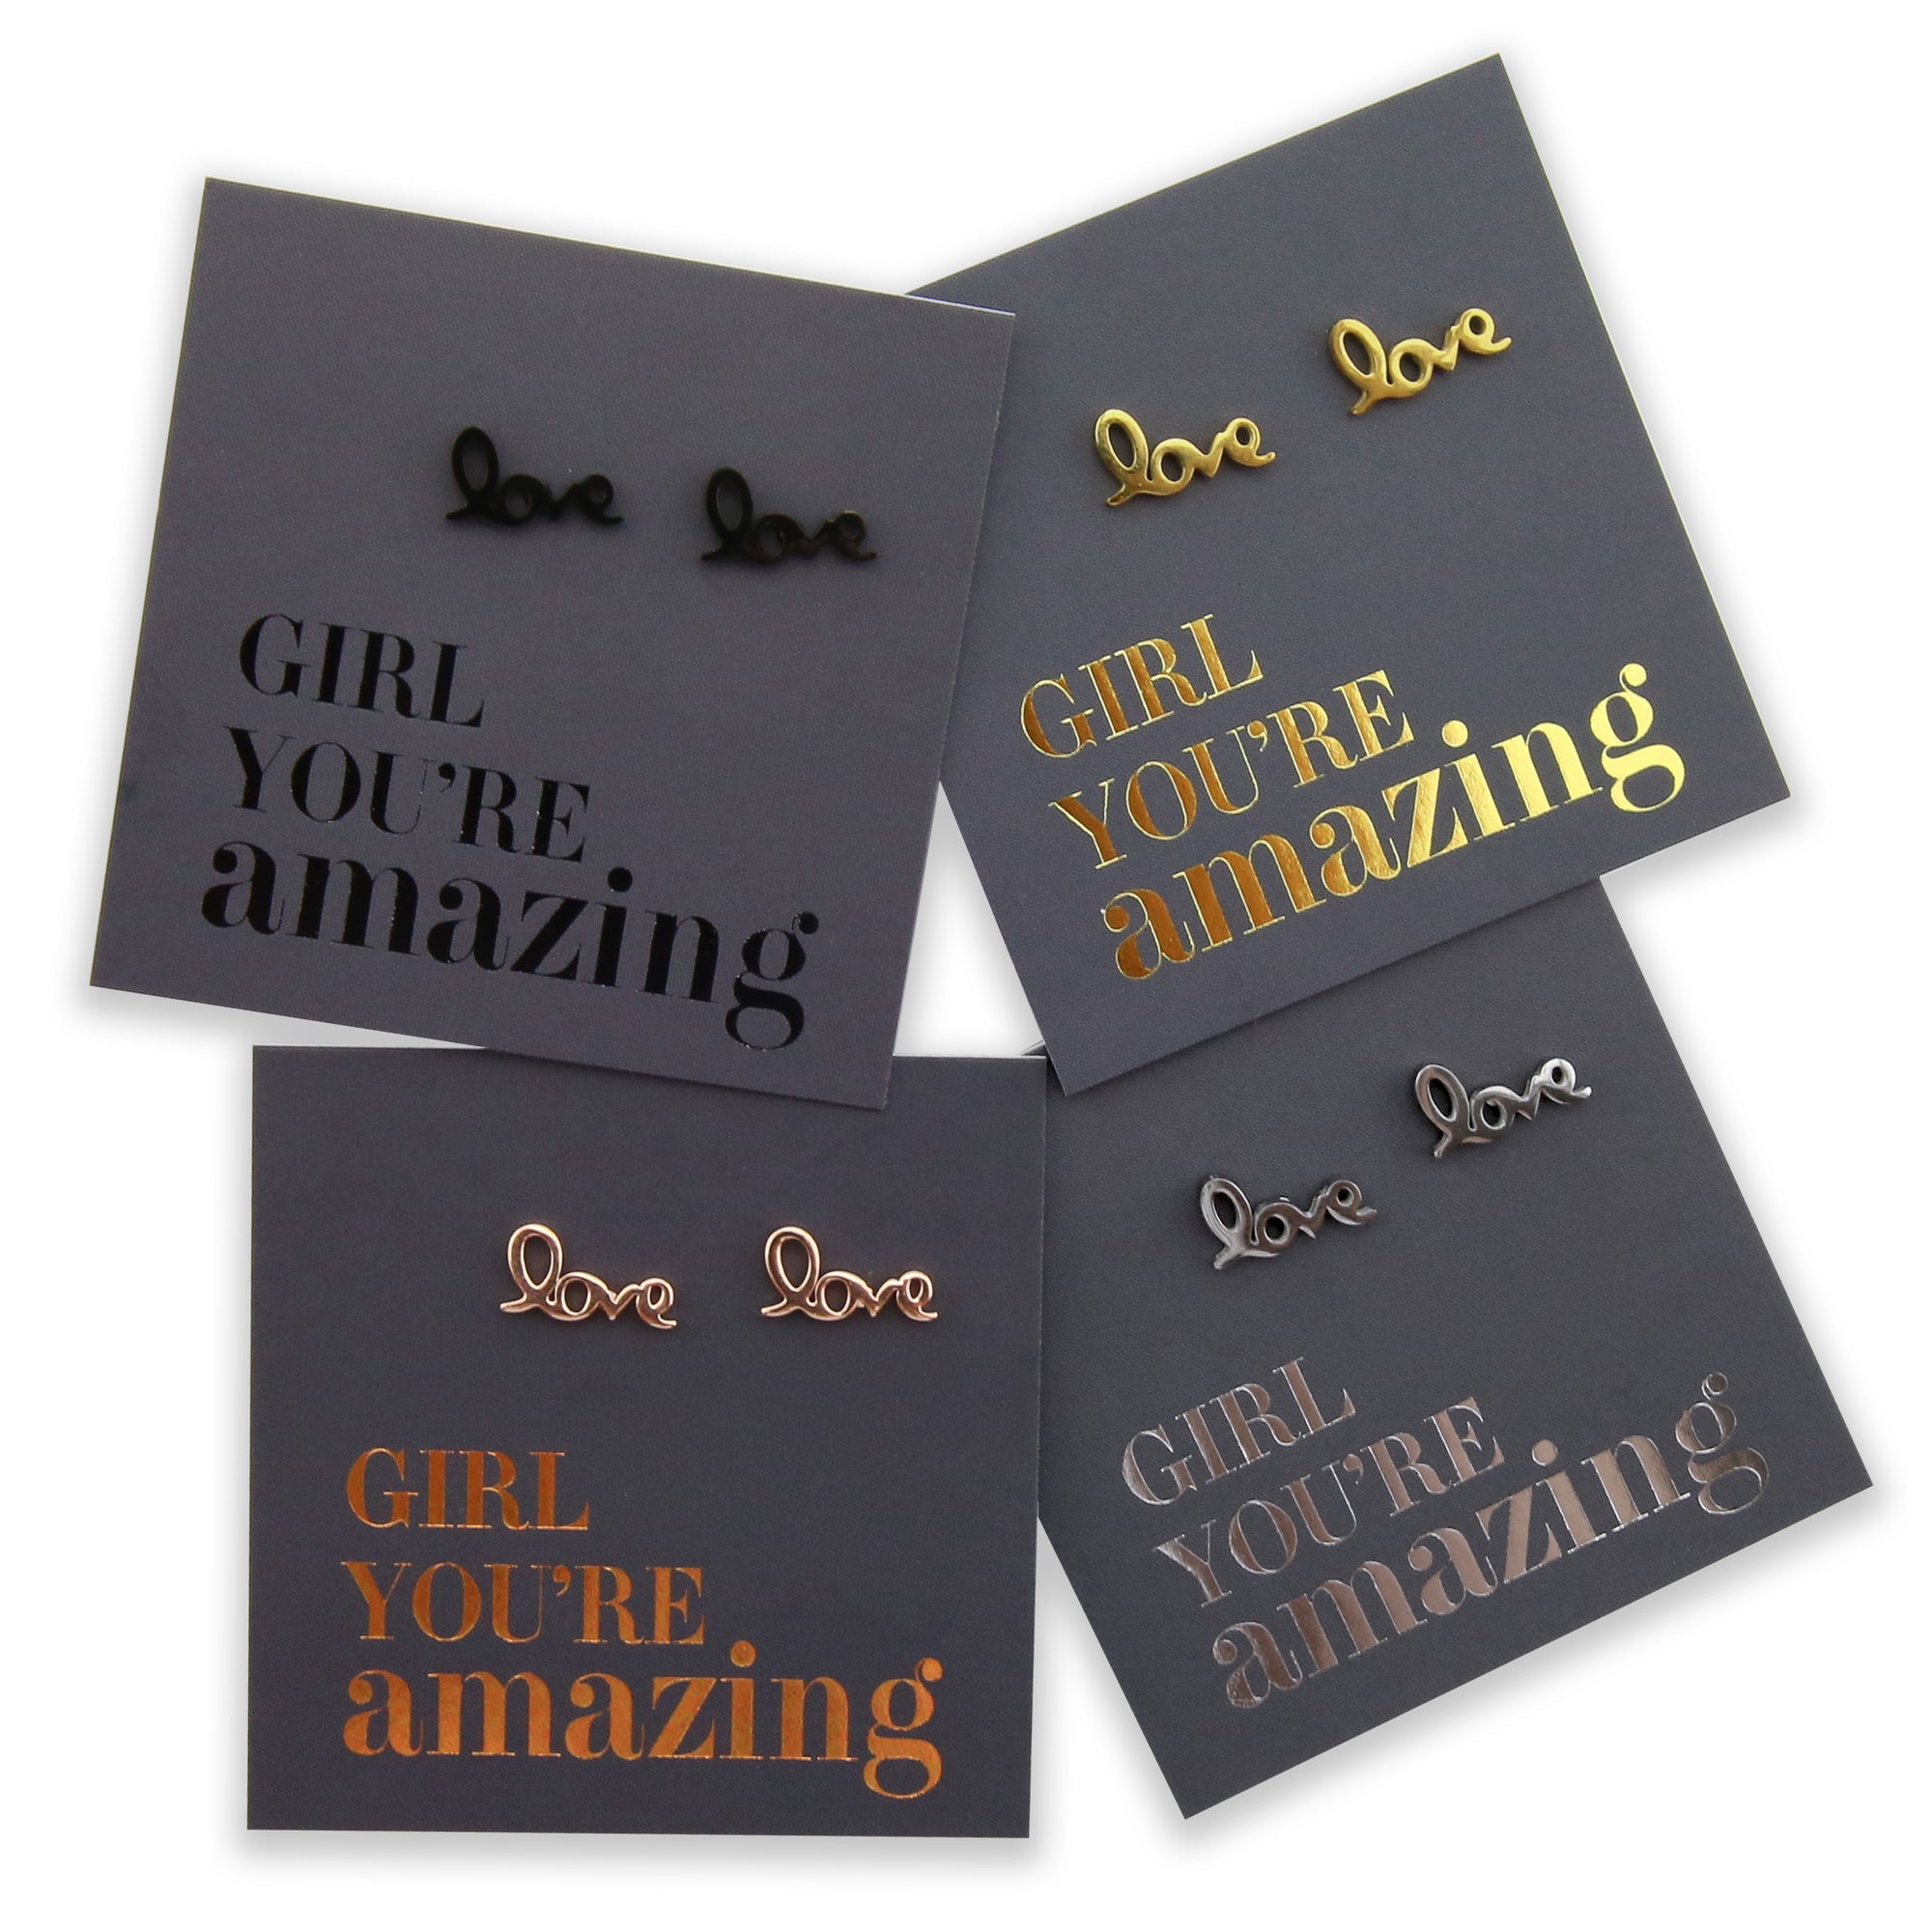 Stainless Steel Earring Studs - Girl You're Amazing - LOVE